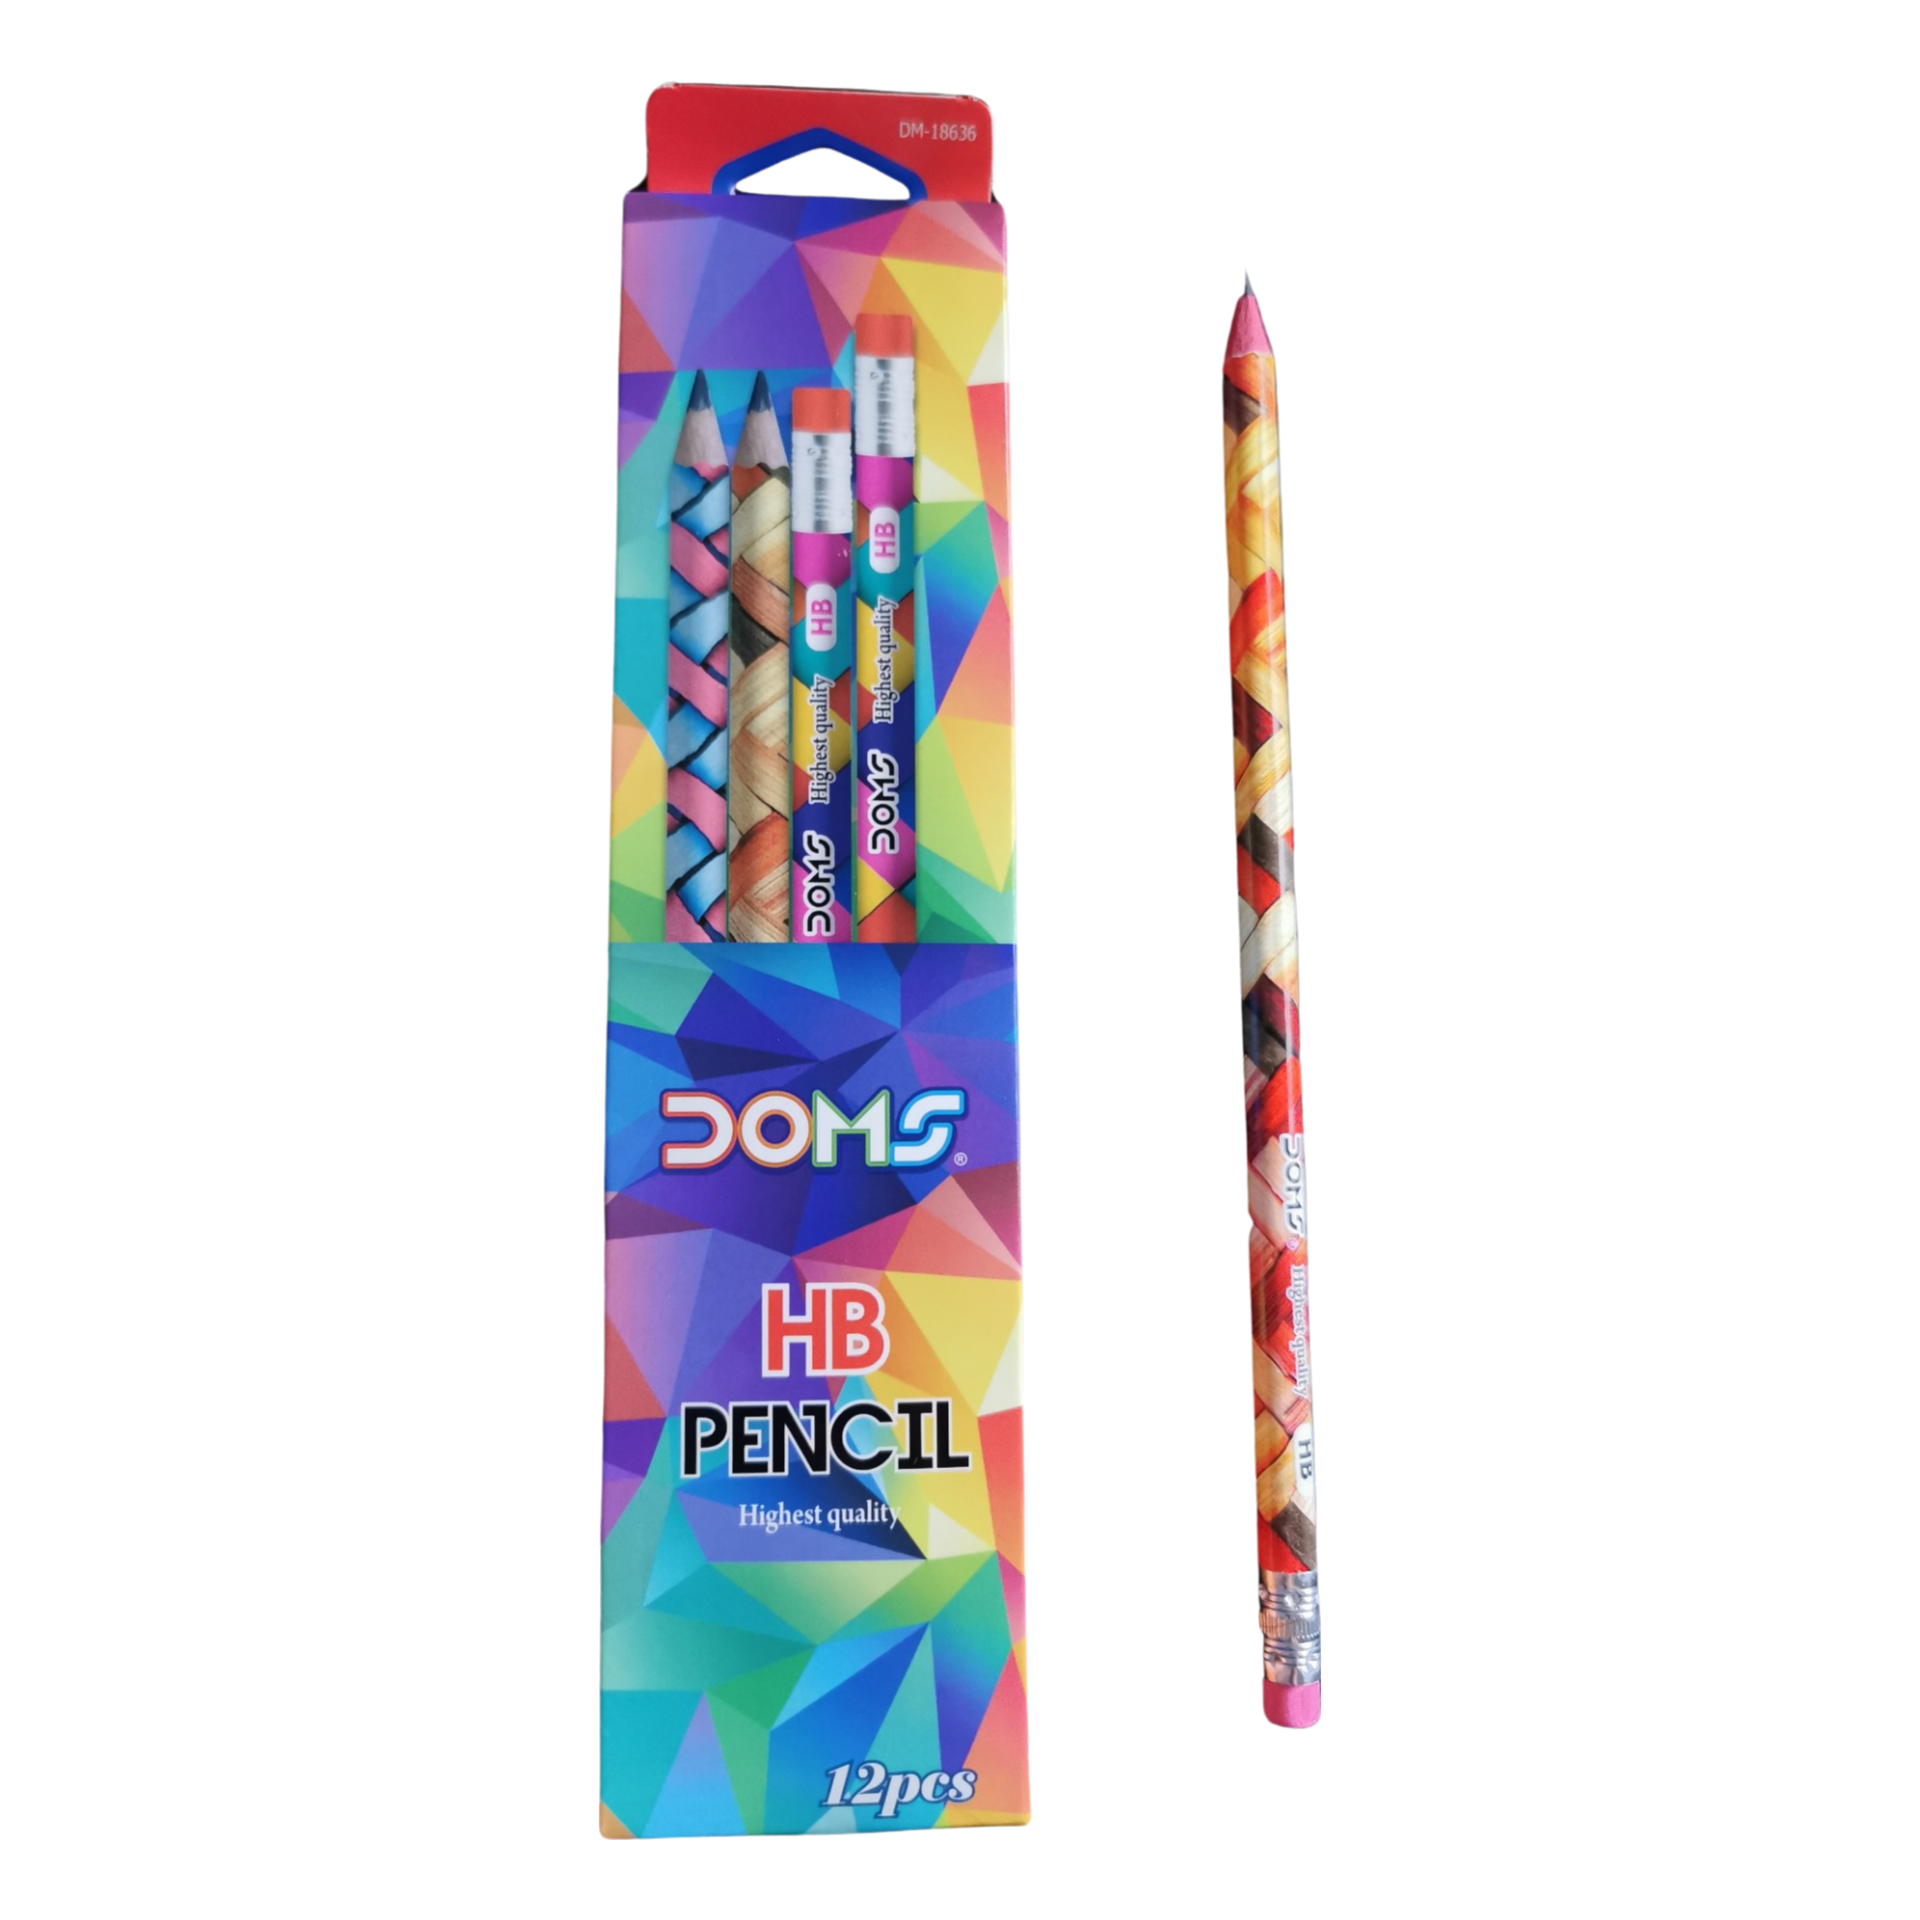 DOMS High Quality pencil , HB (Pack of 12) (many colors)